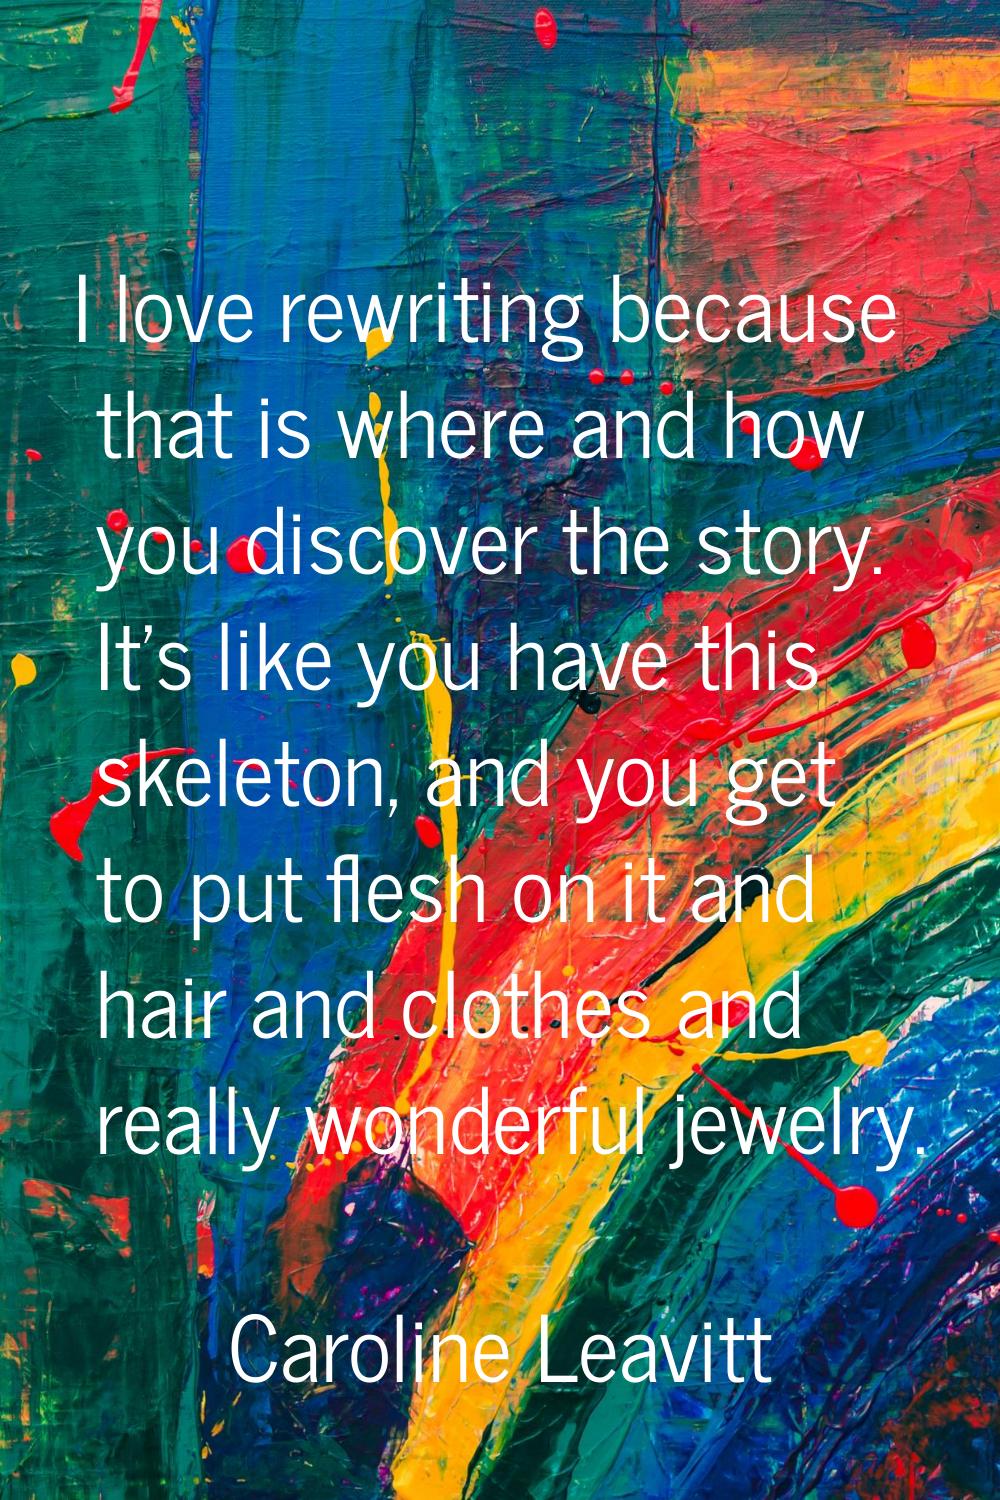 I love rewriting because that is where and how you discover the story. It's like you have this skel